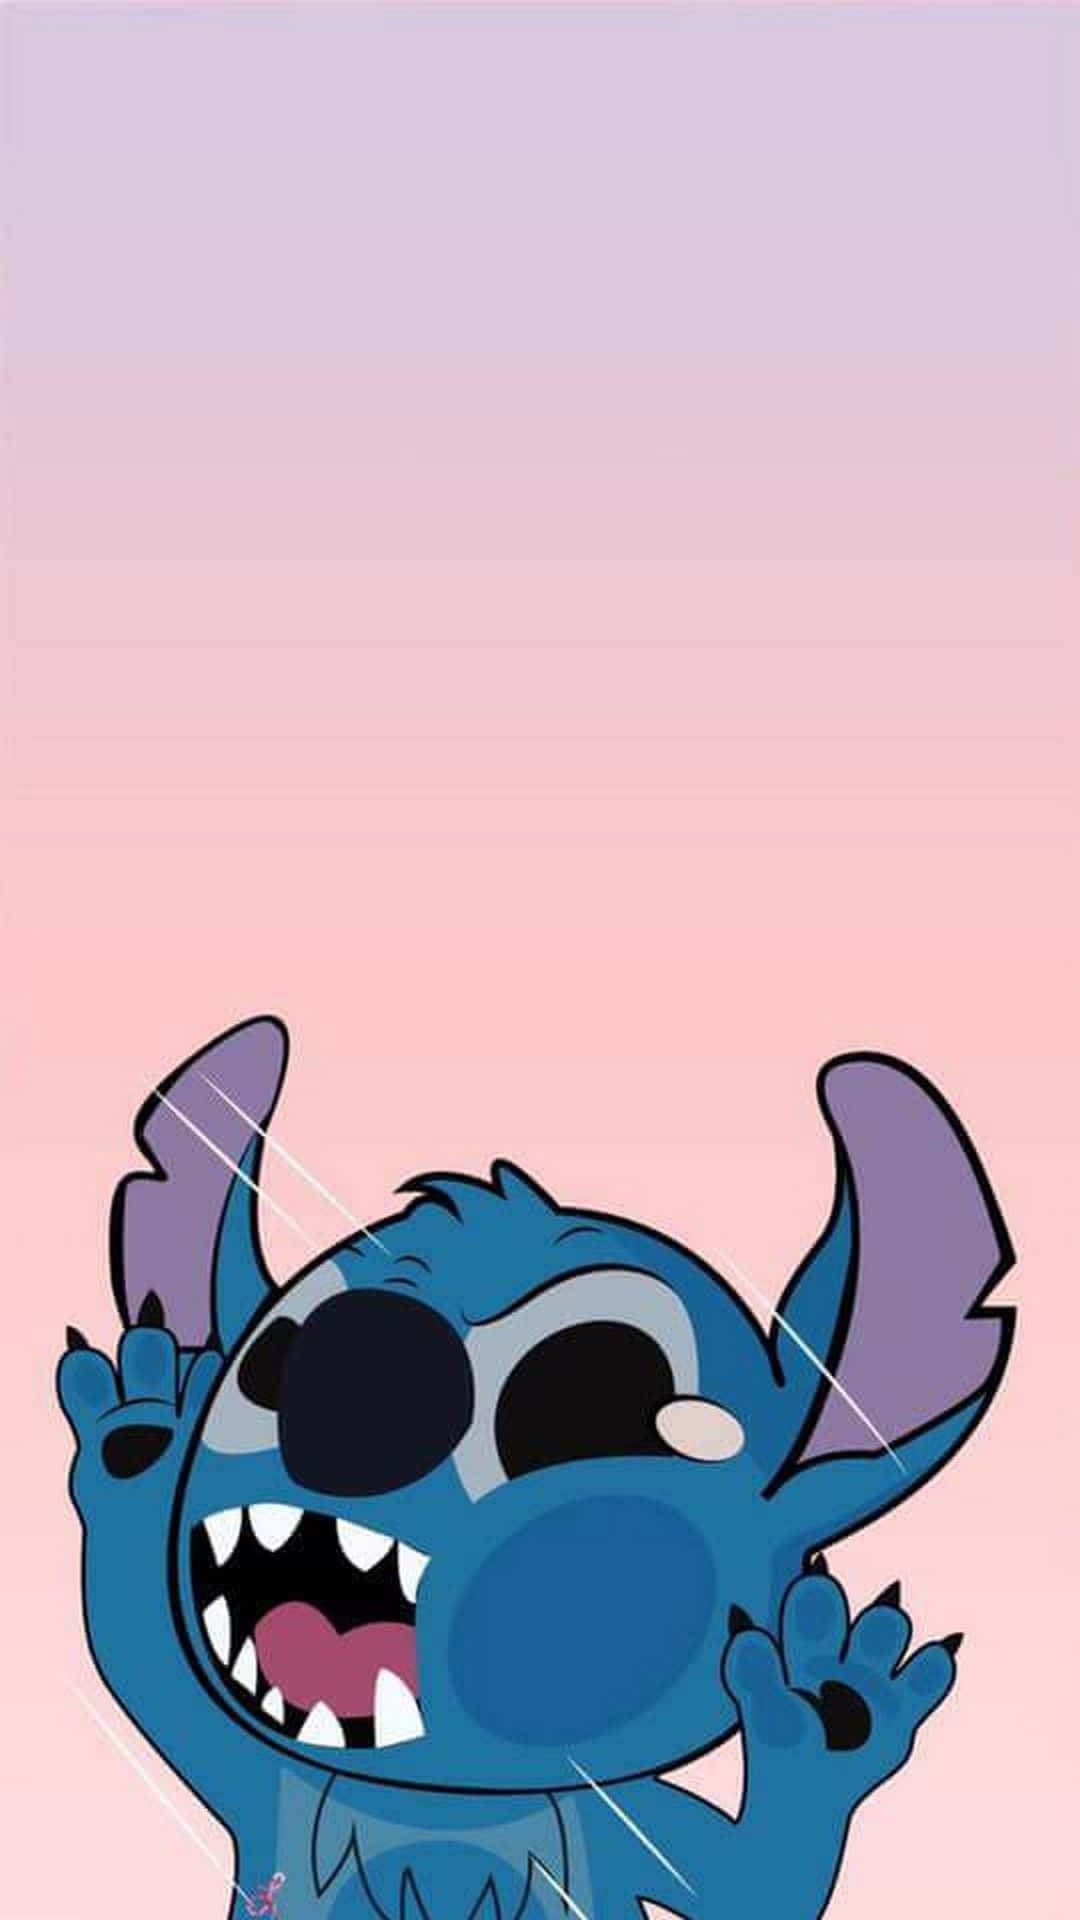 "Lovable Stitch Mugging for the Camera!"